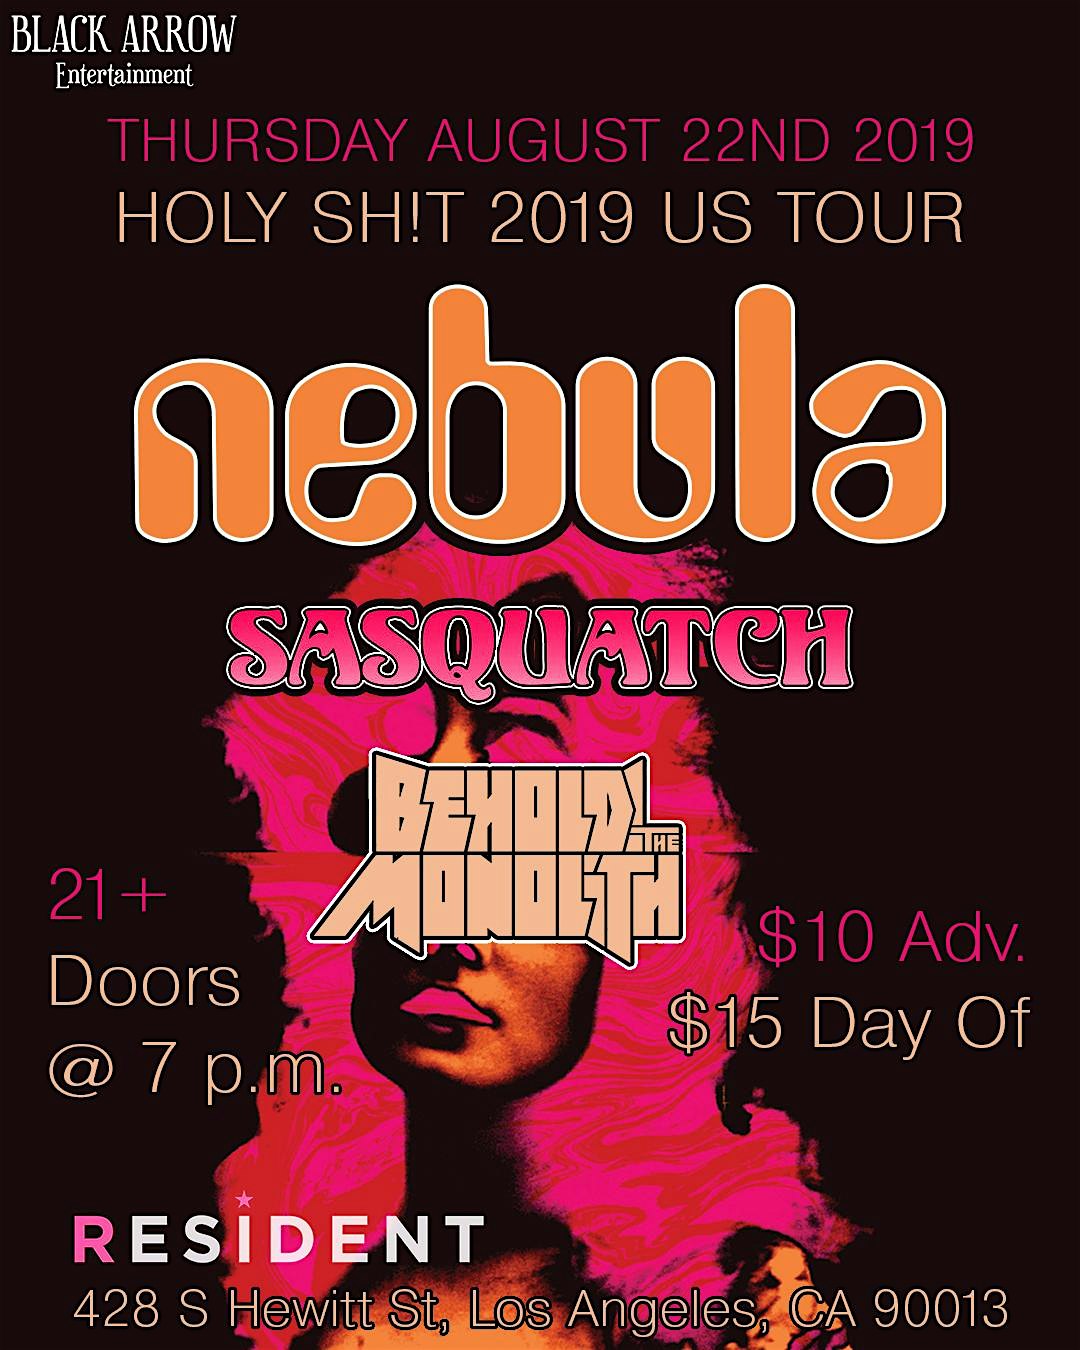 Nebula/Sasquatch/Behold! The Monolith - Tickets Available at the Door